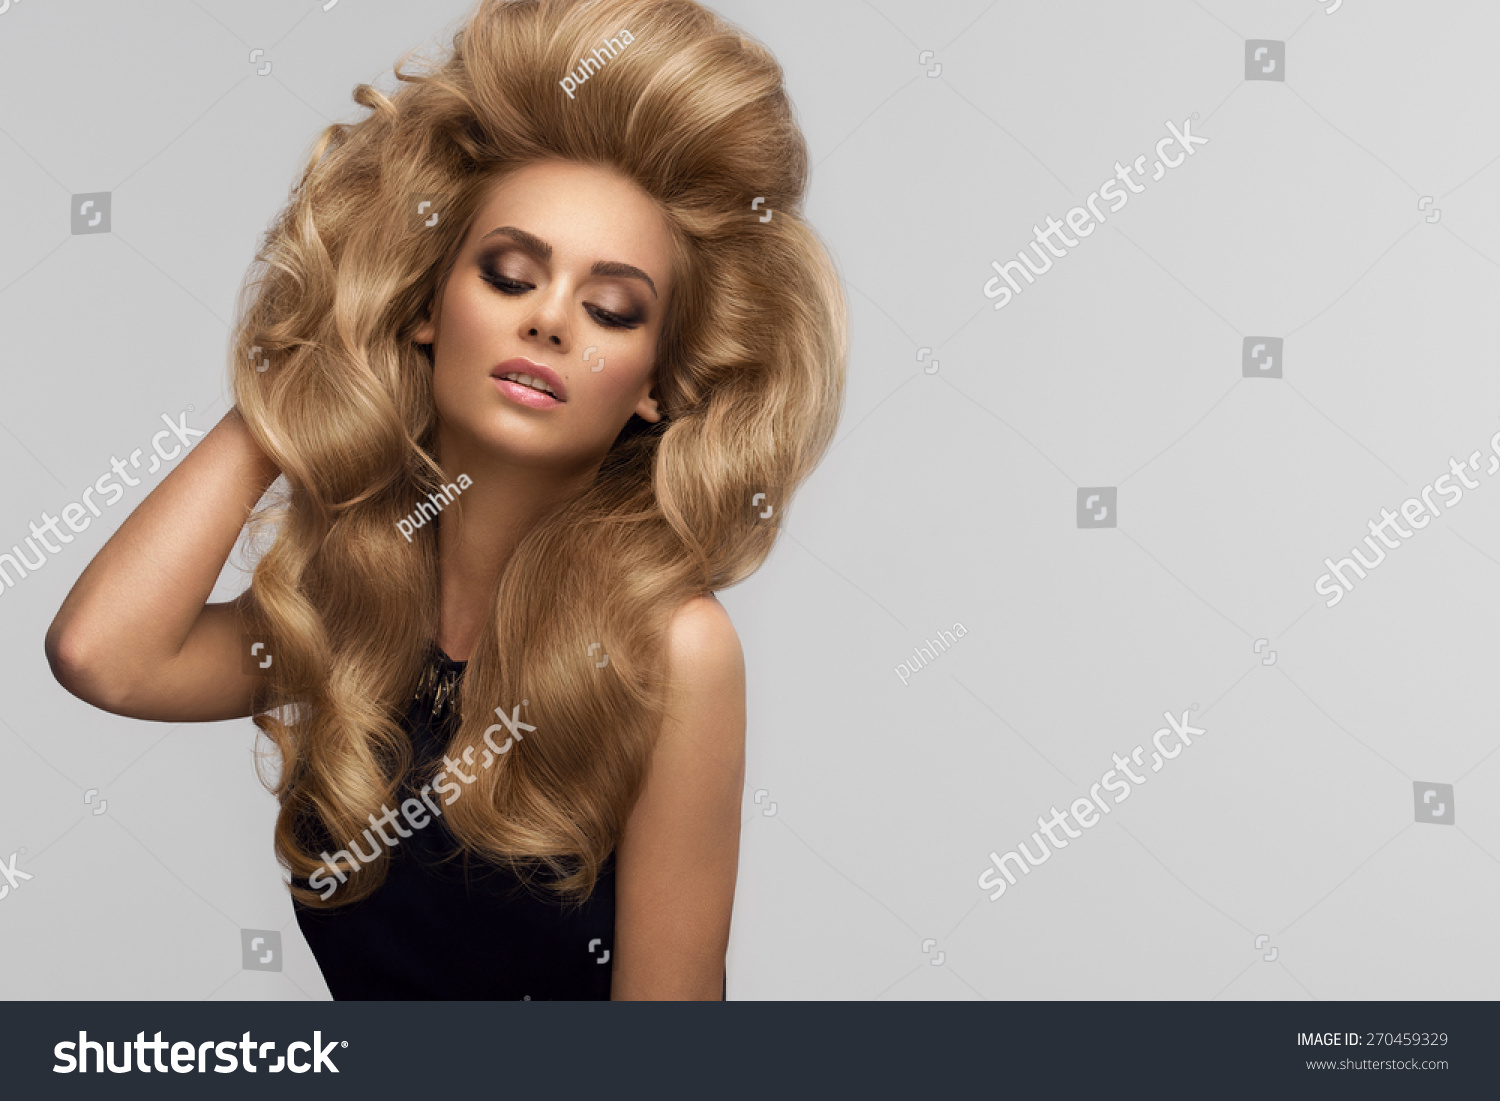 Hair volume. Portrait of beautiful Blonde with Long Wavy Hair. High quality image. #270459329